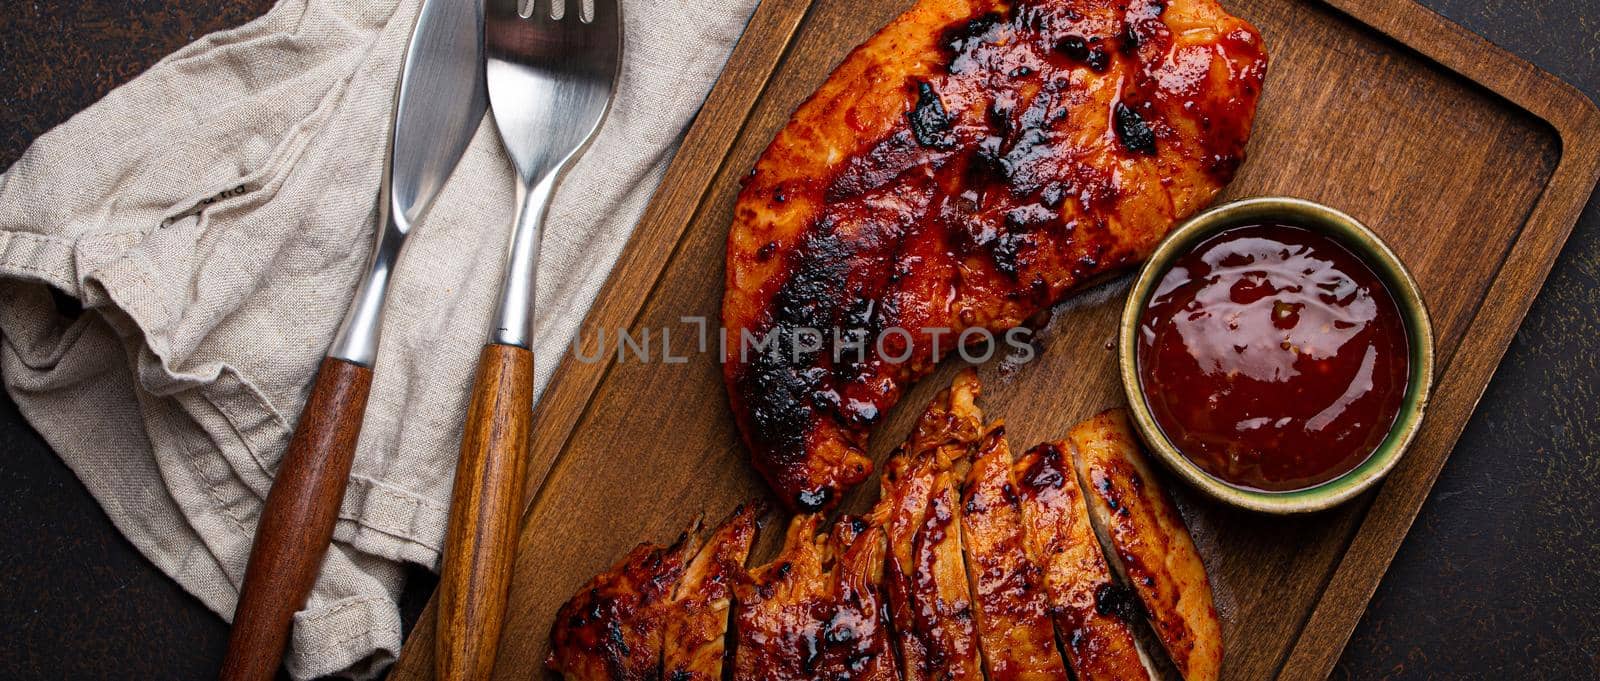 Grilled turkey or chicken fillet with red sauce served and sliced on wooden cutting board by its_al_dente